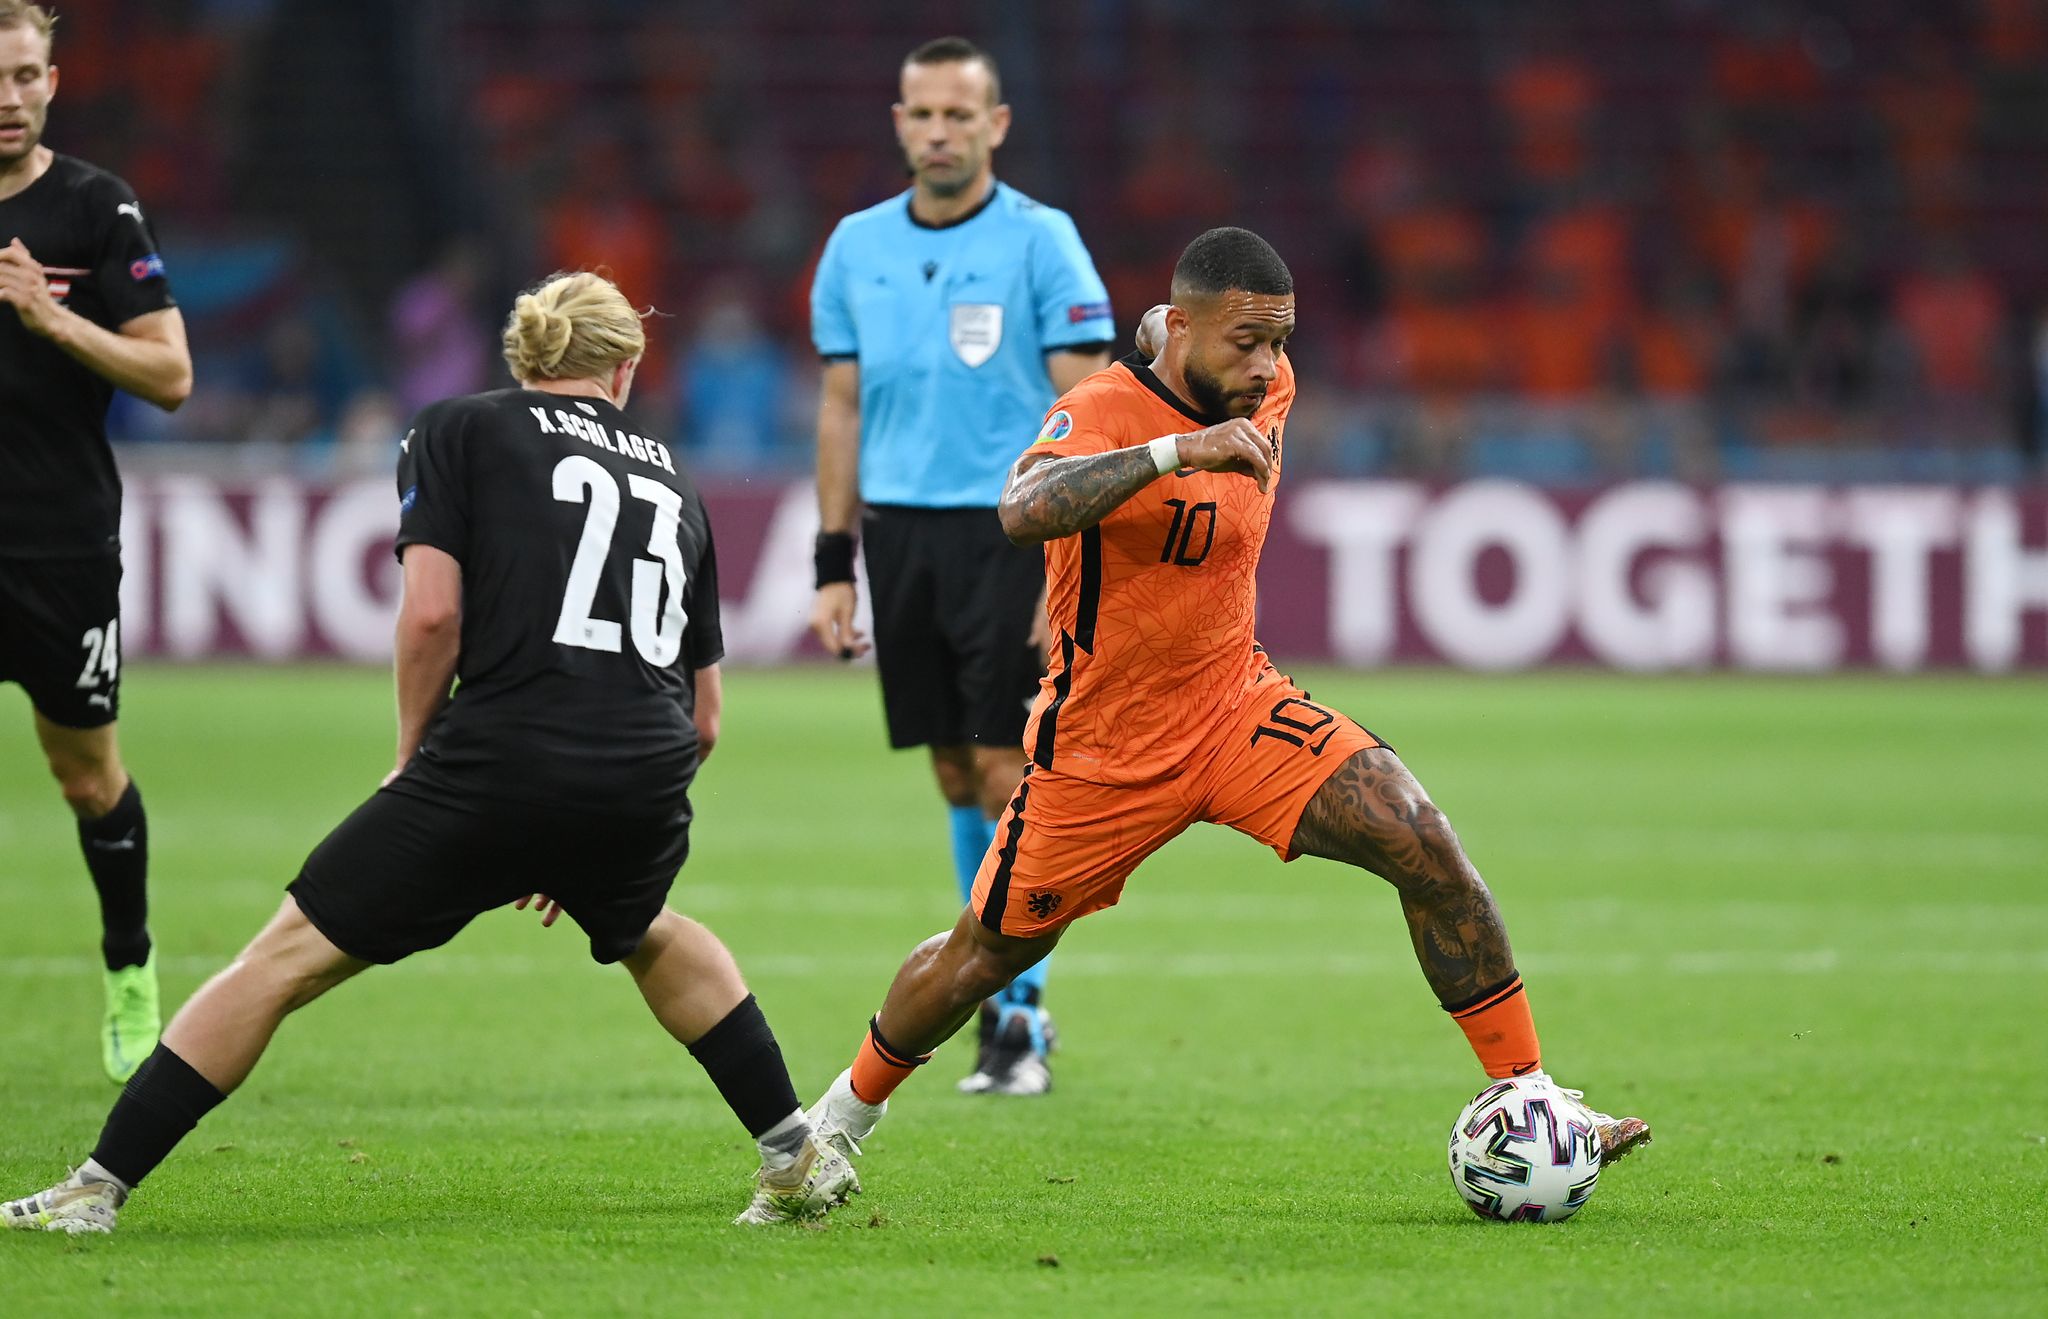 Memphis Depay’s Euro 2020 has been hit and miss so far | The Seattle Times